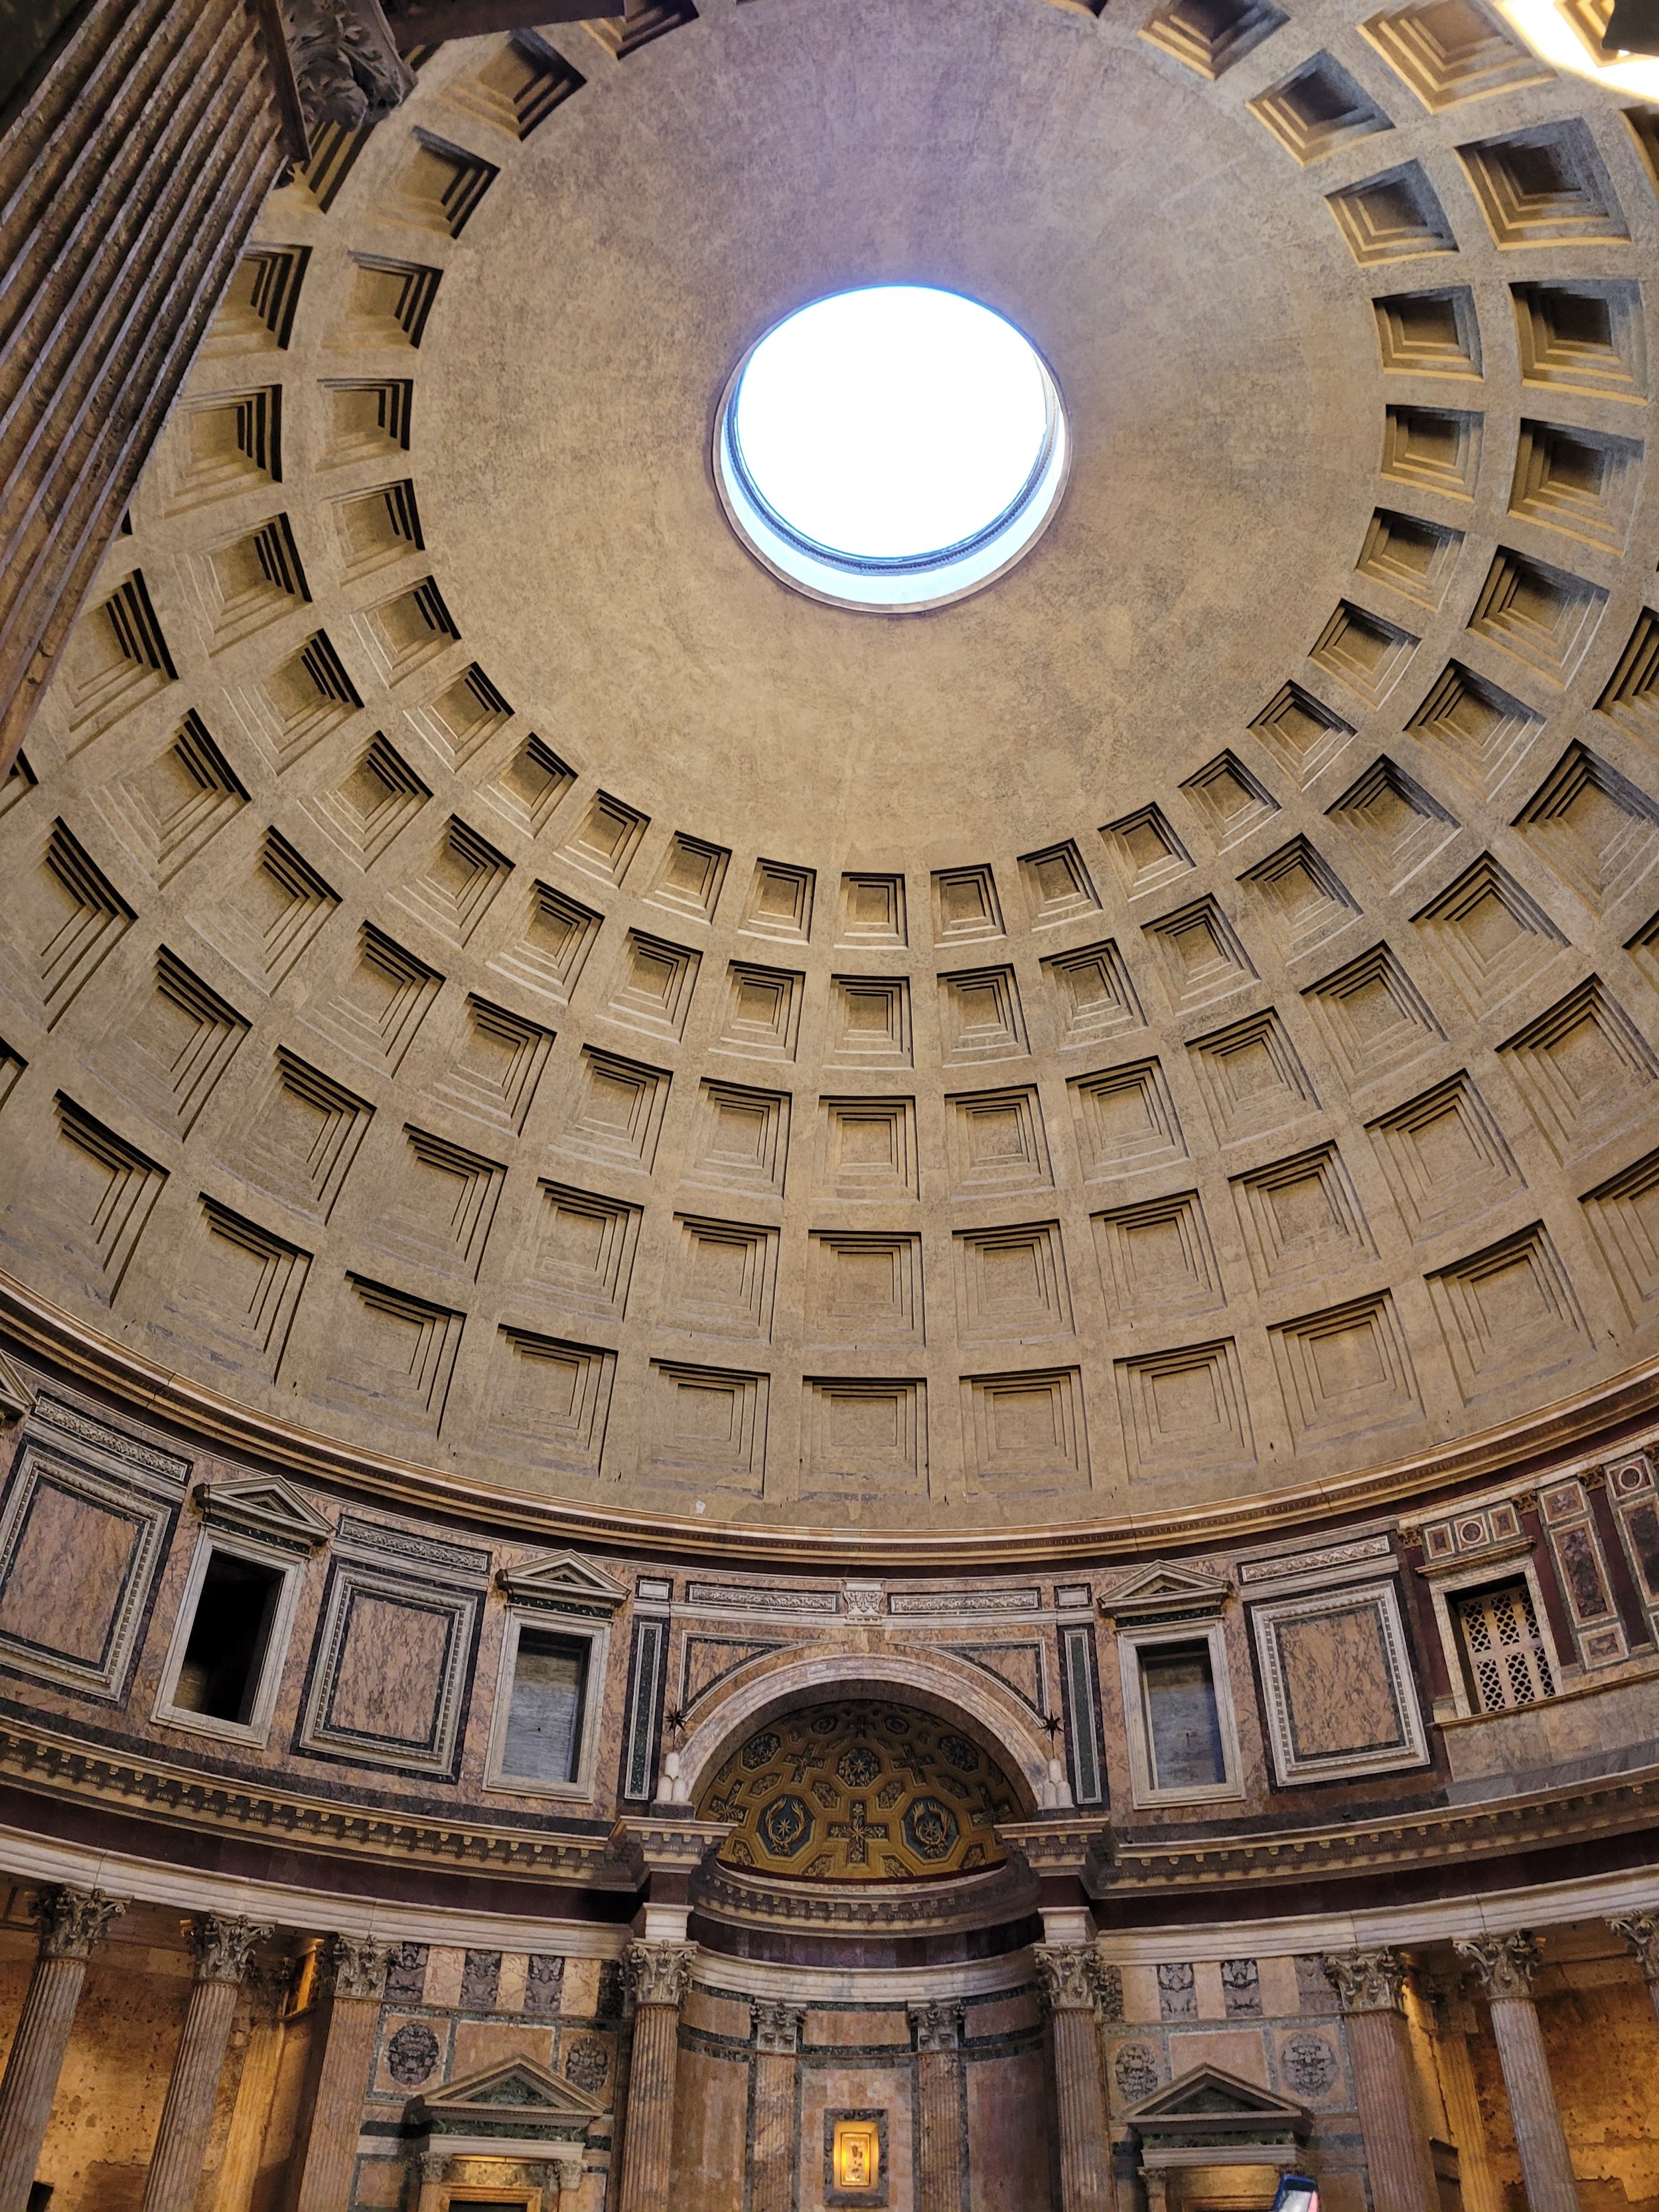 inside the pantheon - The Oculus